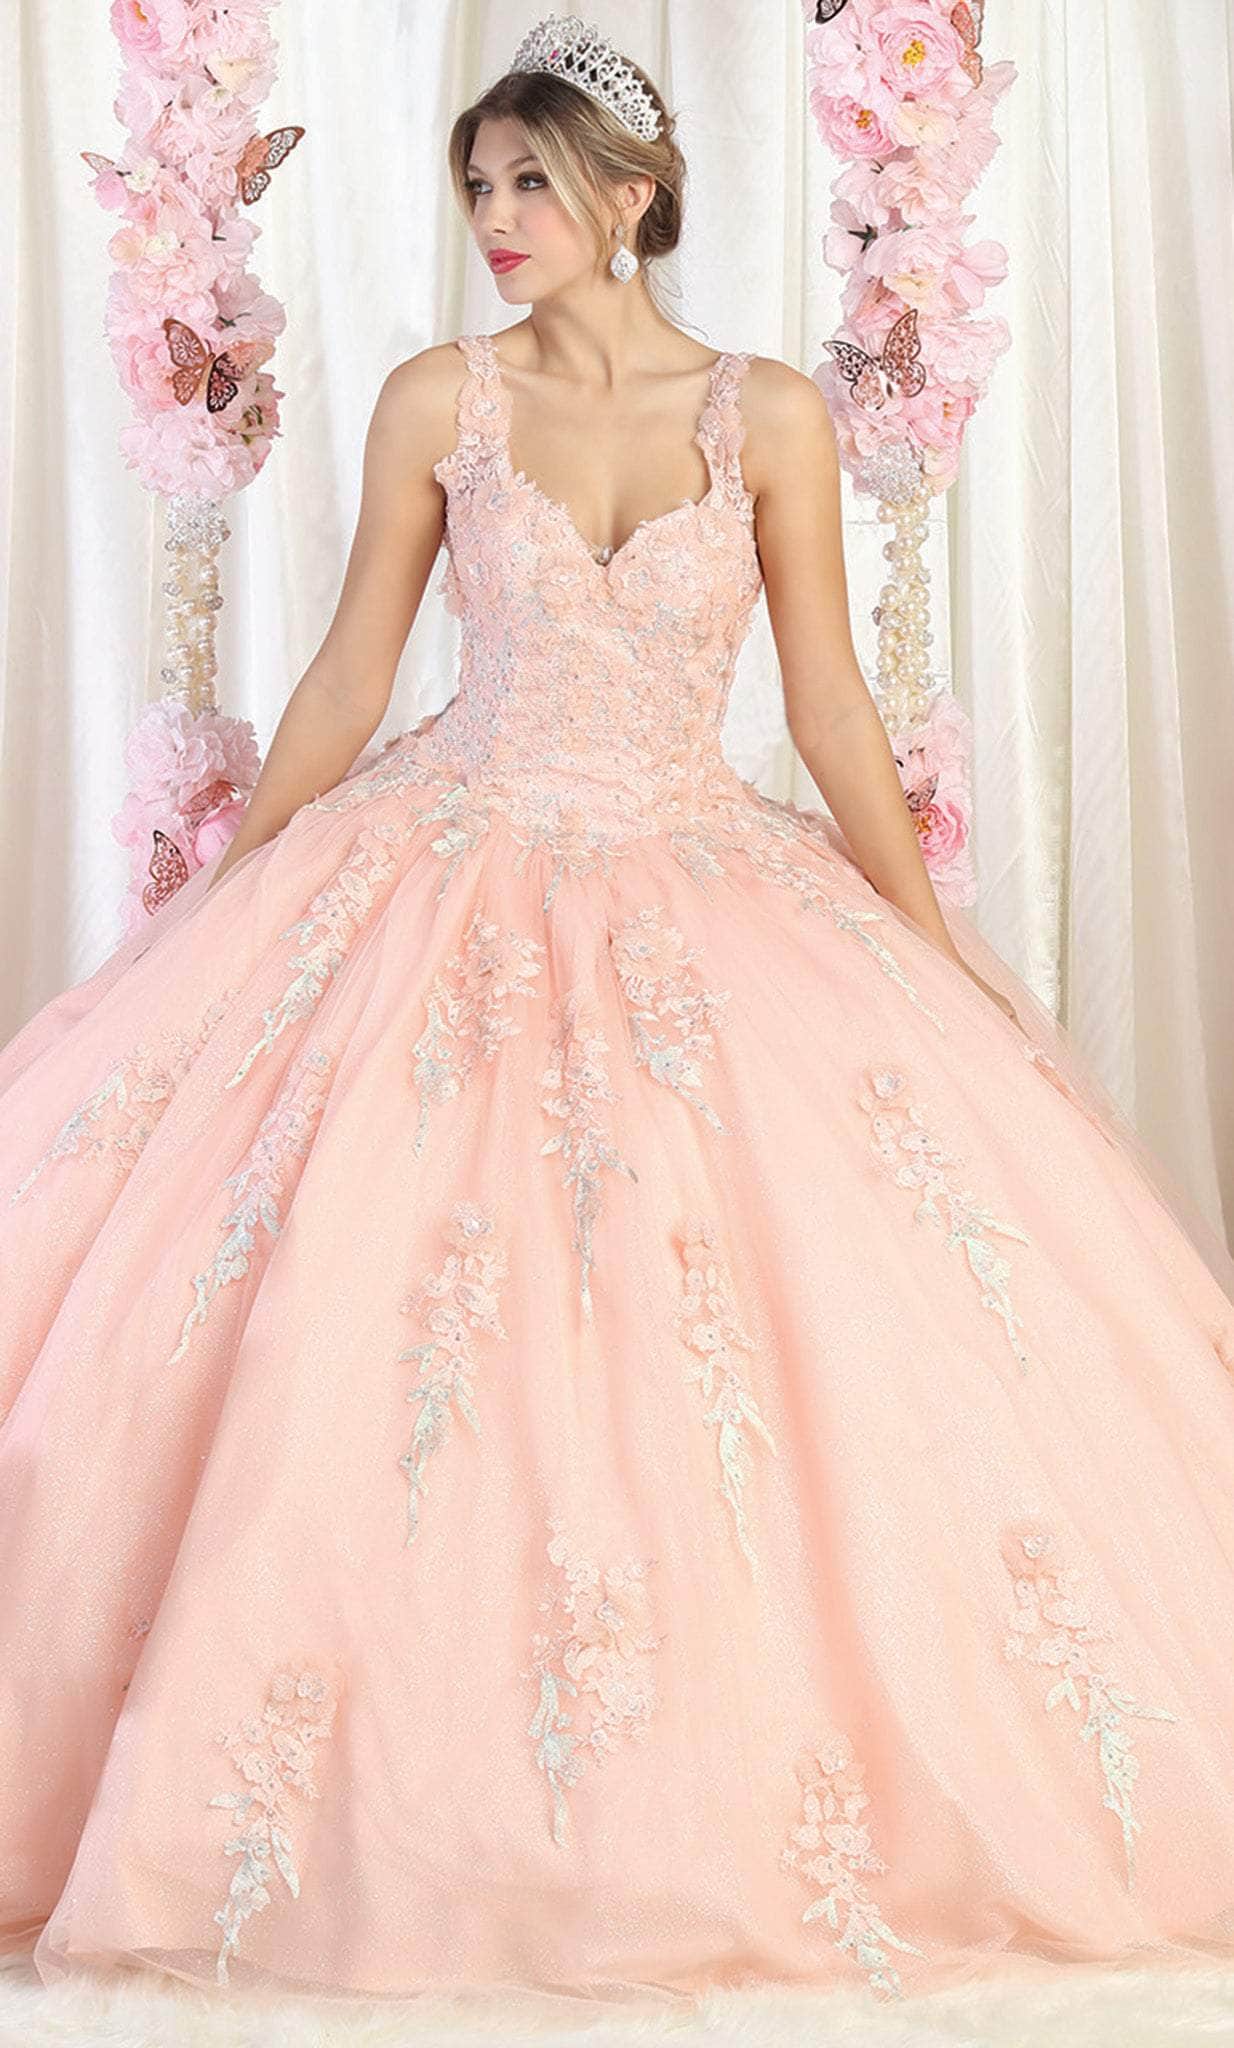 Image of May Queen LK181 - Embroidered Tulle Quinceanera Ballgown